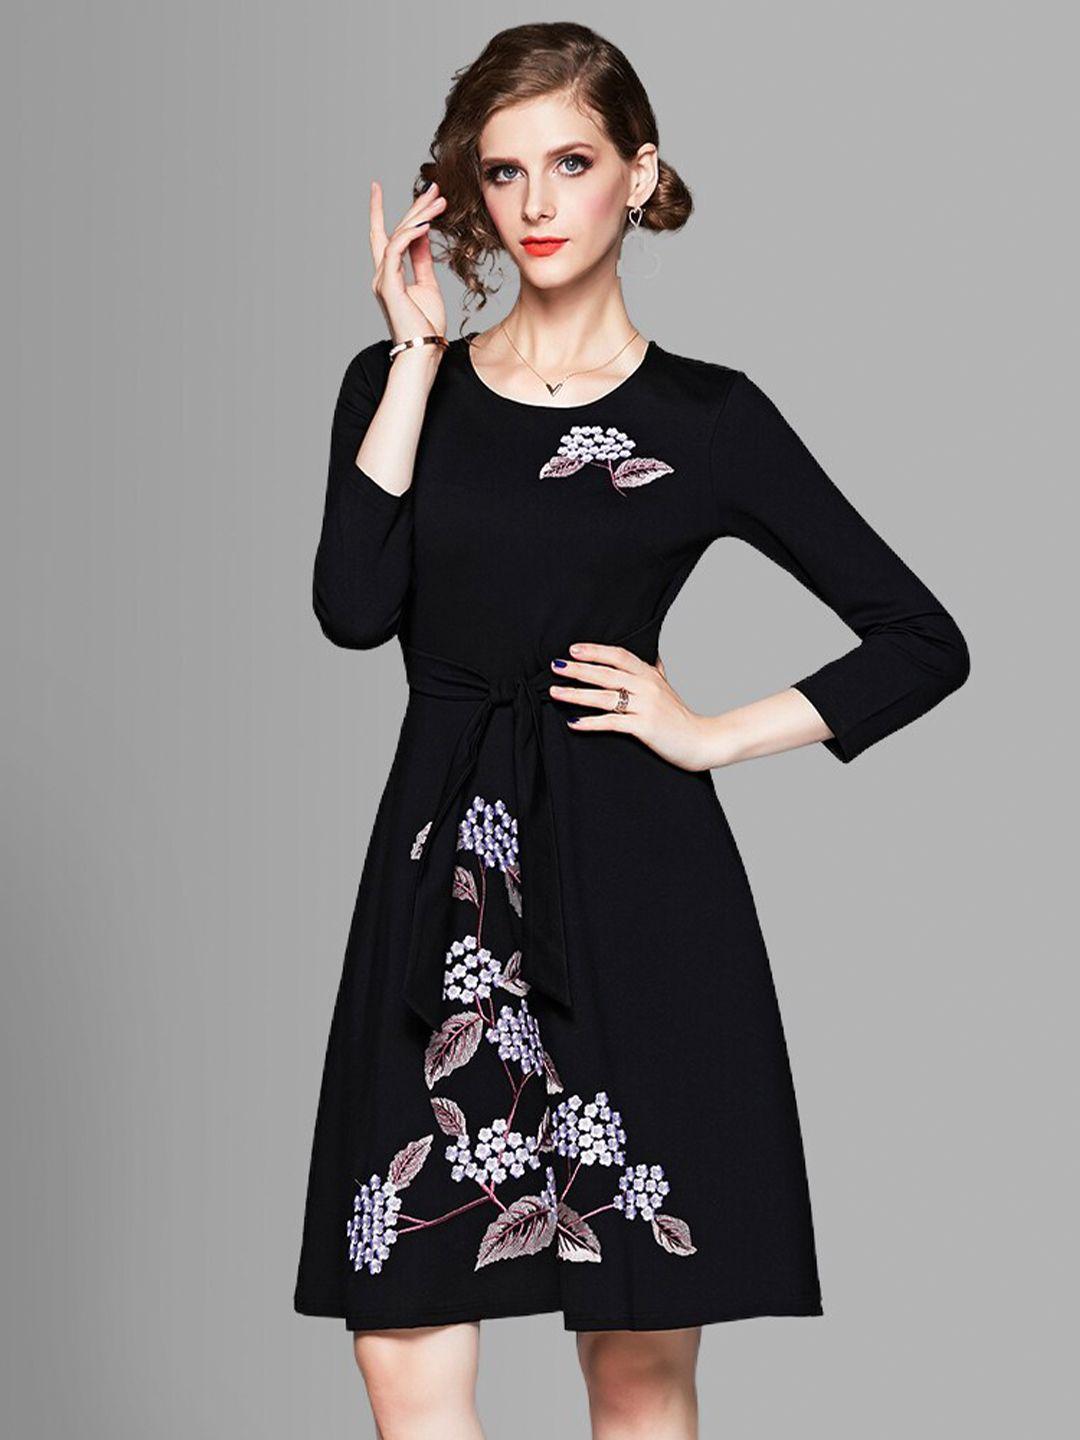 jc collection women black floral embroidered dress